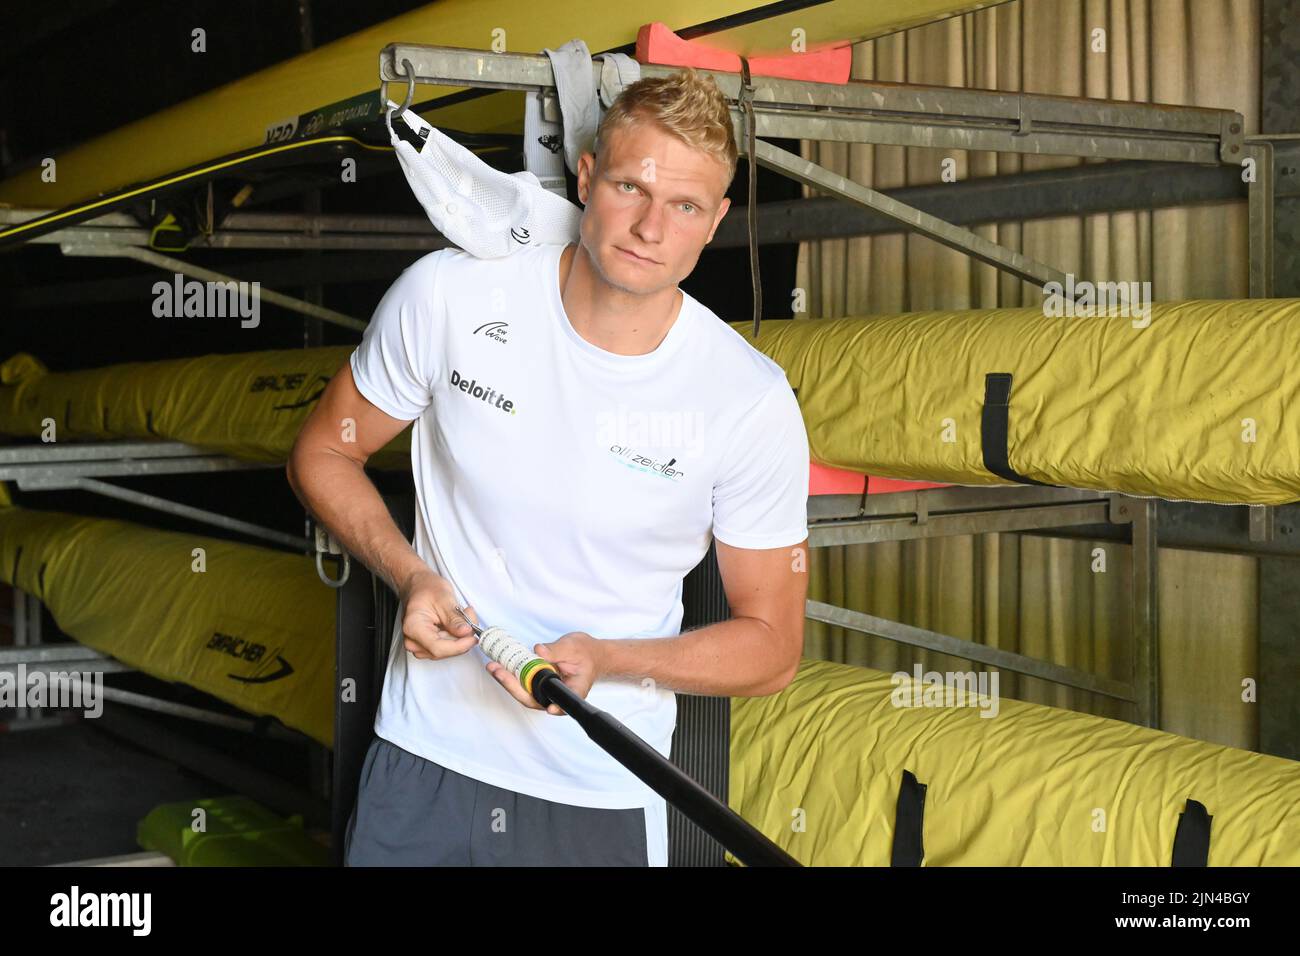 PRODUCTION - 27 June 2022, Bavaria, Oberschleißheim: World and European rowing champion Oliver Zeidler stands in a boat hall at the Oberschleißheim rowing regatta course. As a child, European champion Oliver Zeidler thought it was 'cool' to see his grandfather in the Olympic book from Munich 1972. 50 years after his grandfather's rowing gold medal, the grandson is aiming for the title himself at the historic site. (to dpa 'Once the grandfather, now the grandson: A rowing gold 'dahoam' should her') Photo: Felix Hörhager/dpa Stock Photo